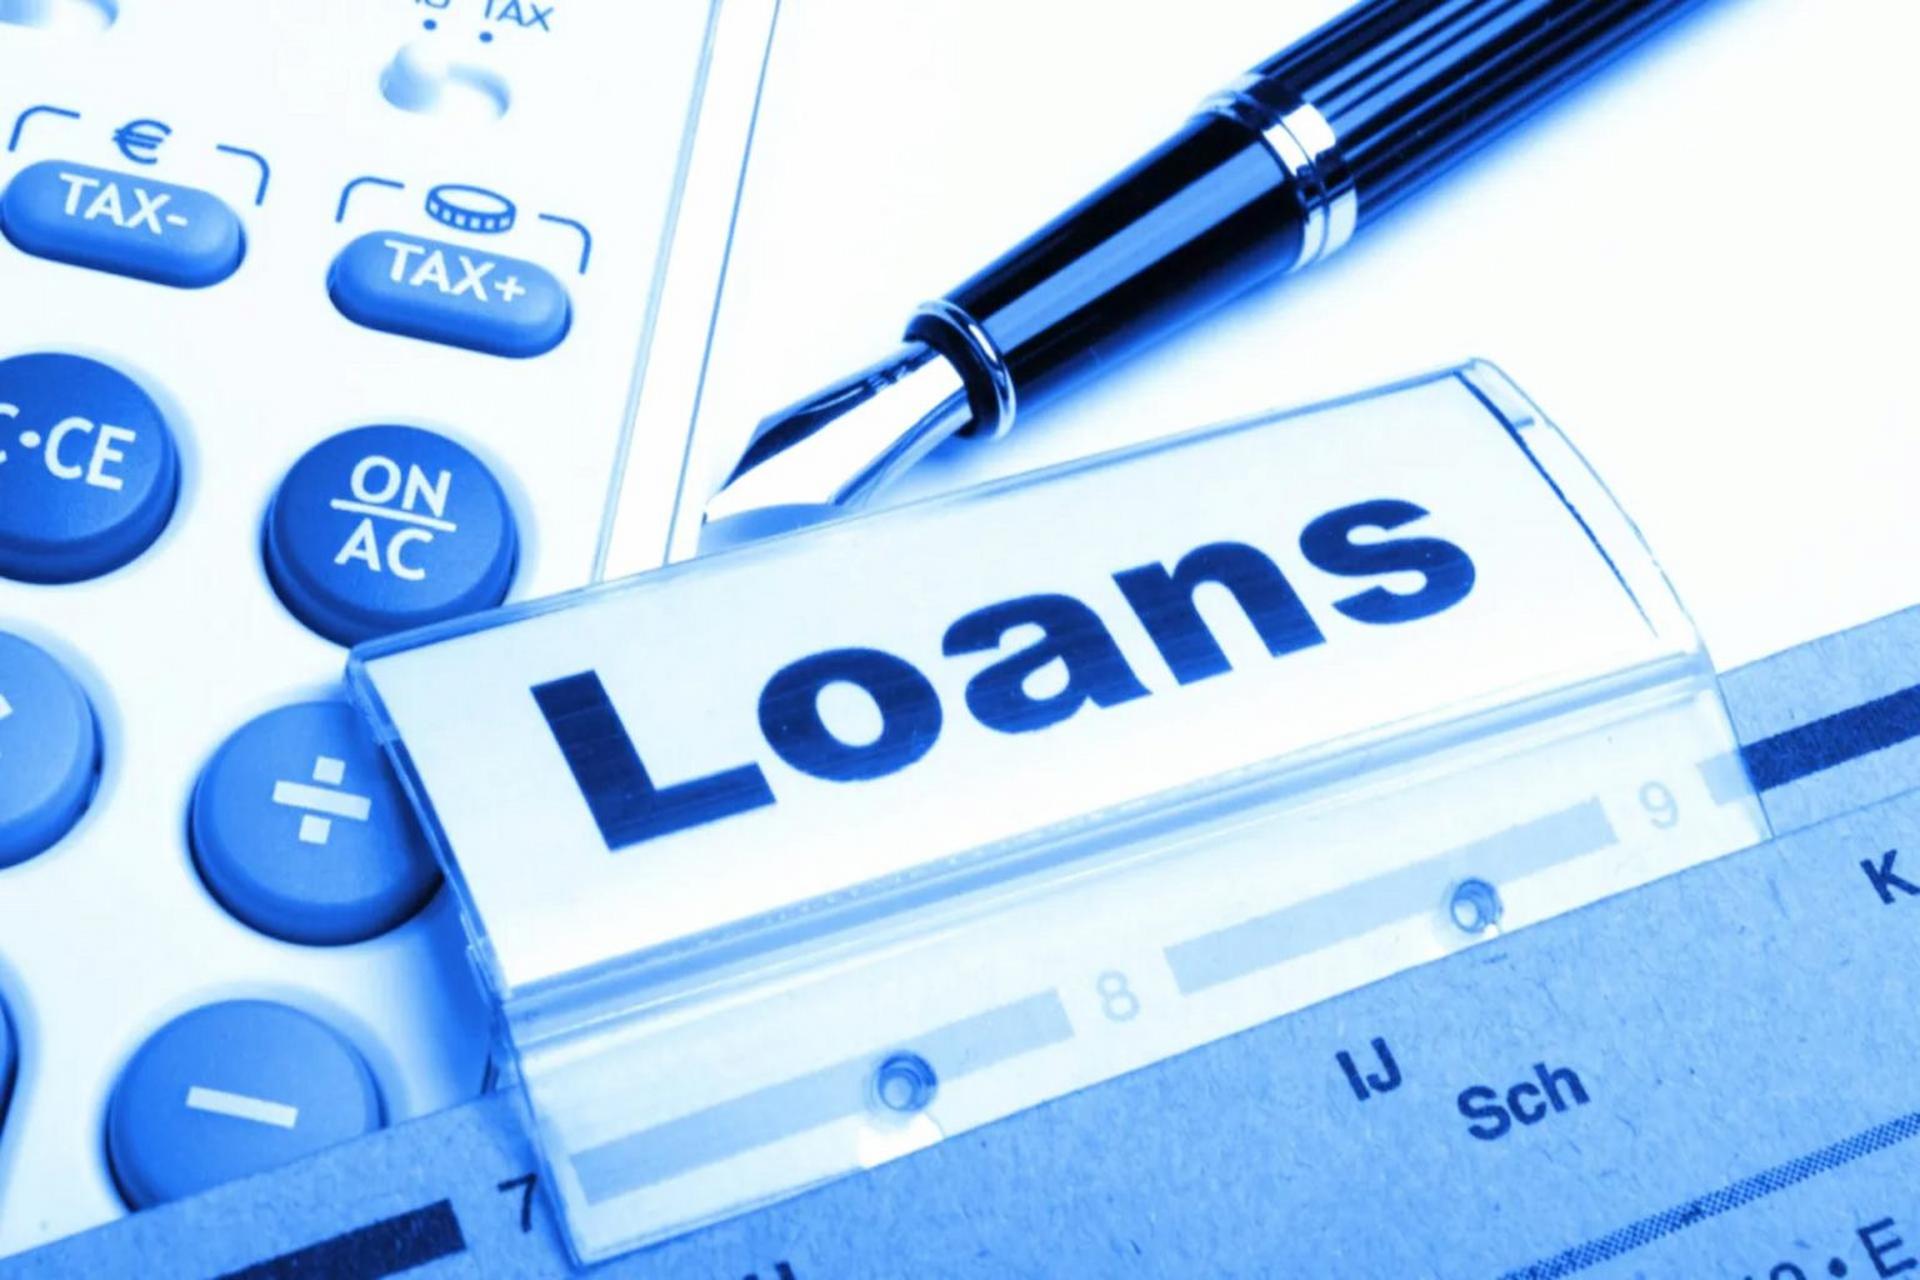 Meeting Urgent Financial Needs: The Advantages of Fast Loans